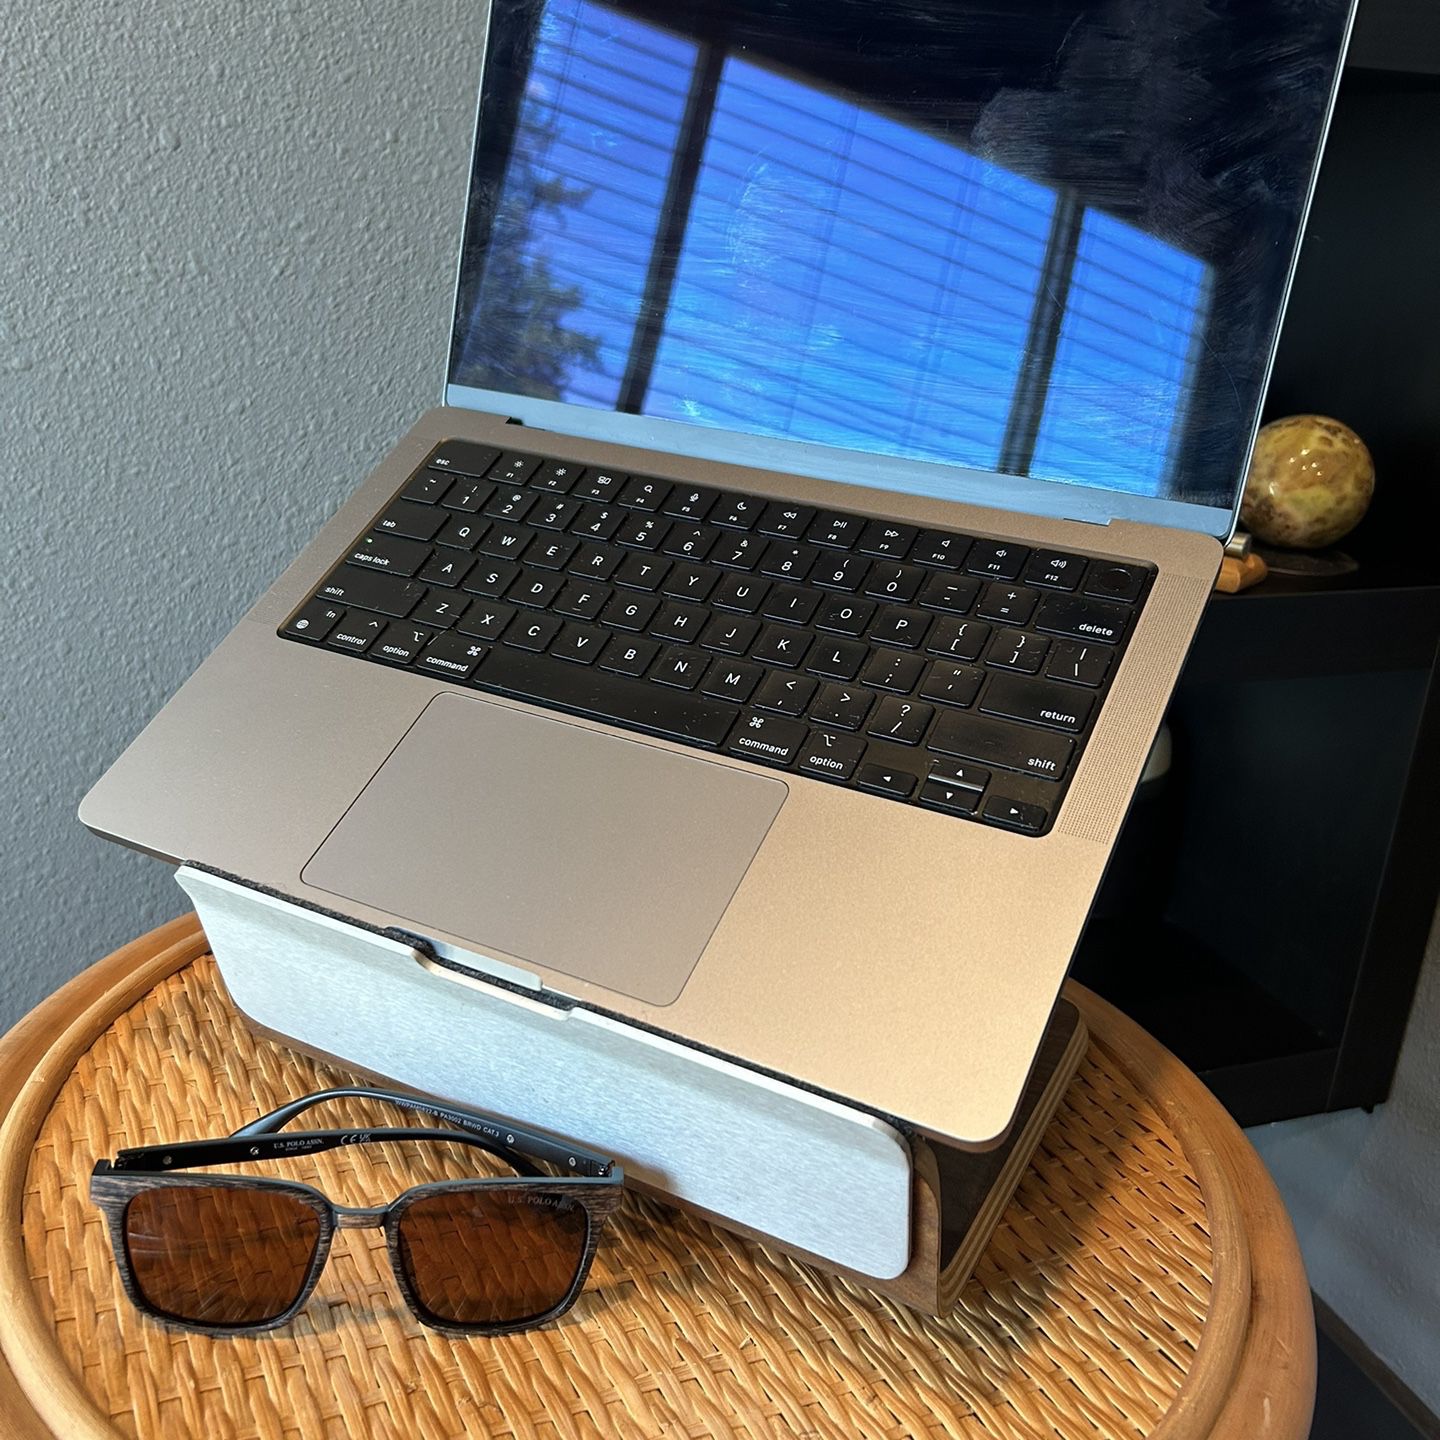 MacBook Pro (M1 Max) - Lightly Used, Perfect for Producers